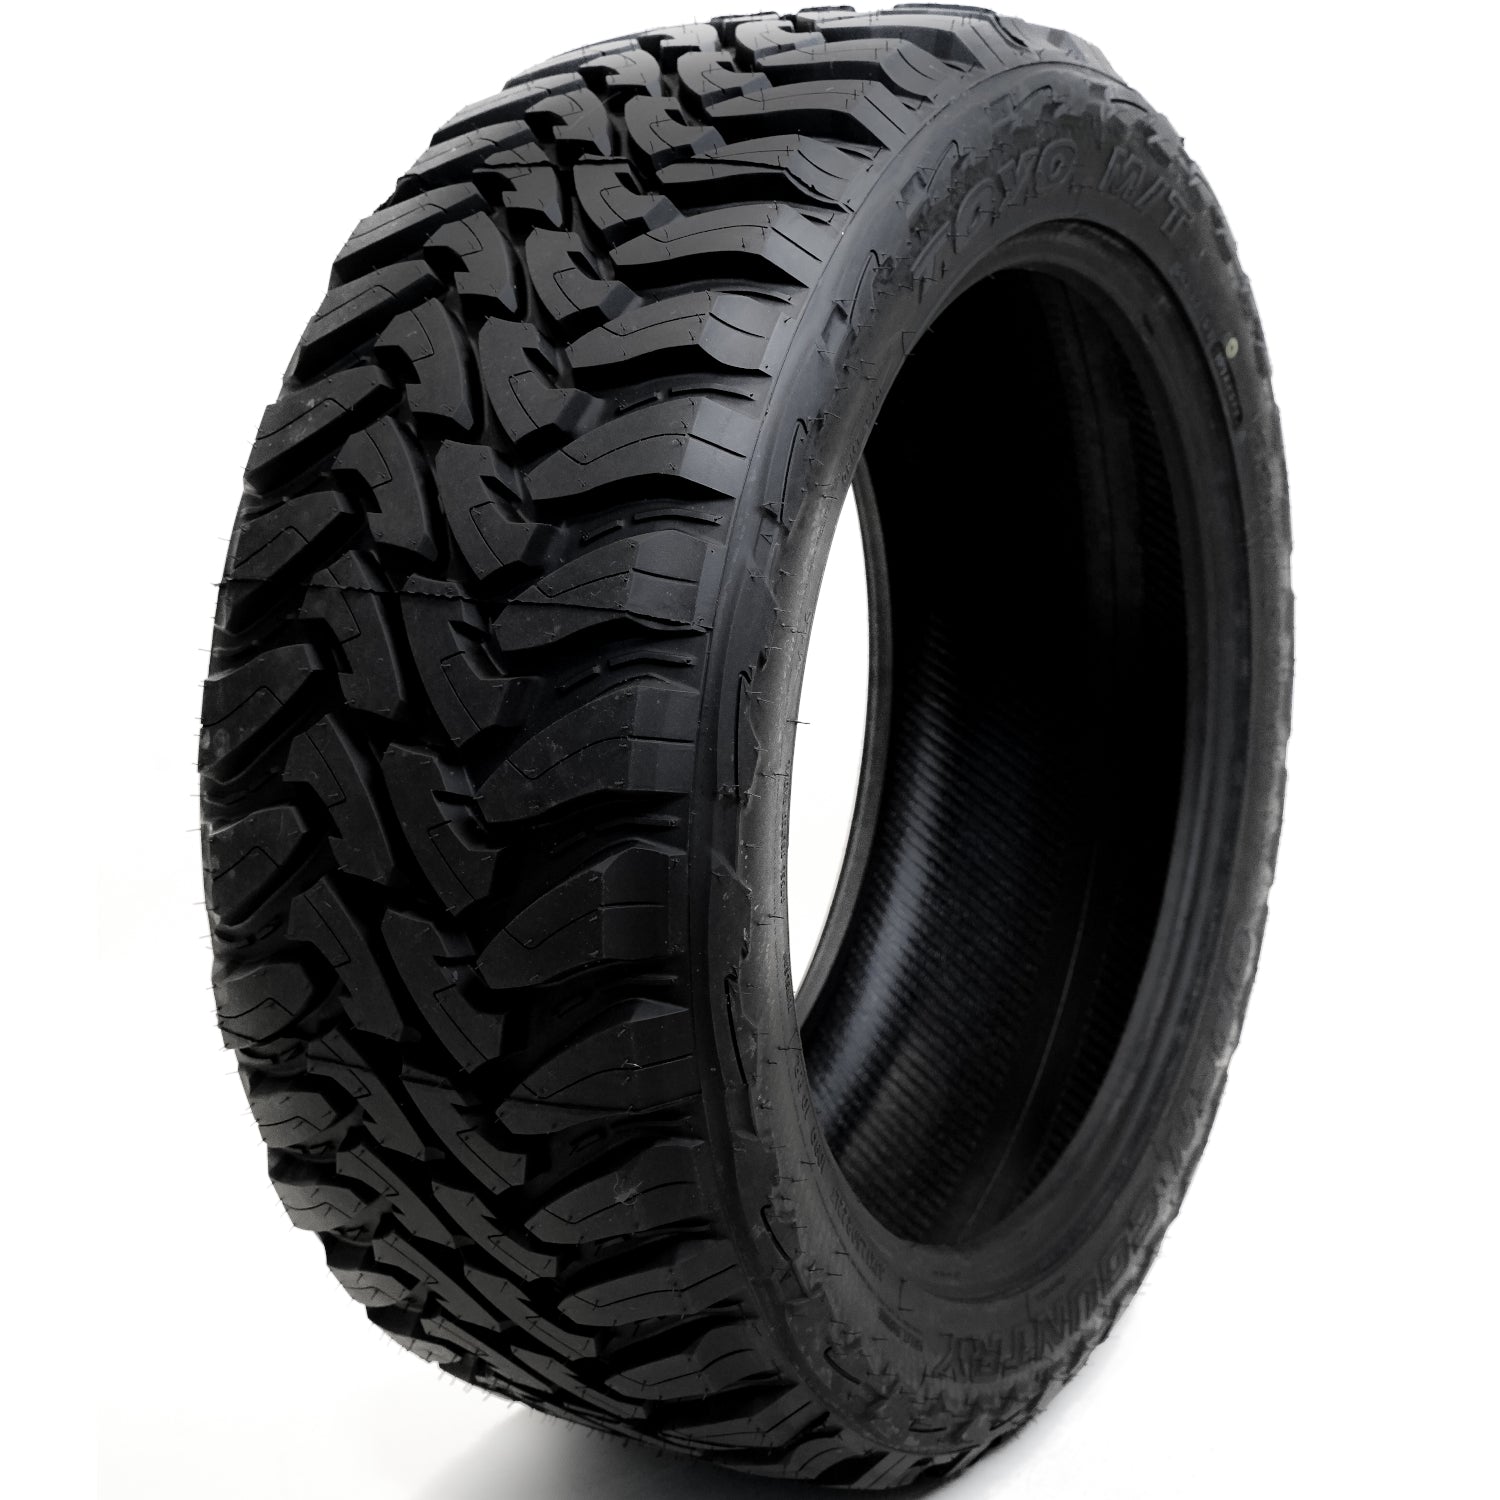 TOYO TIRES OPEN COUNTRY M/T 37X13.50R17LT Tires